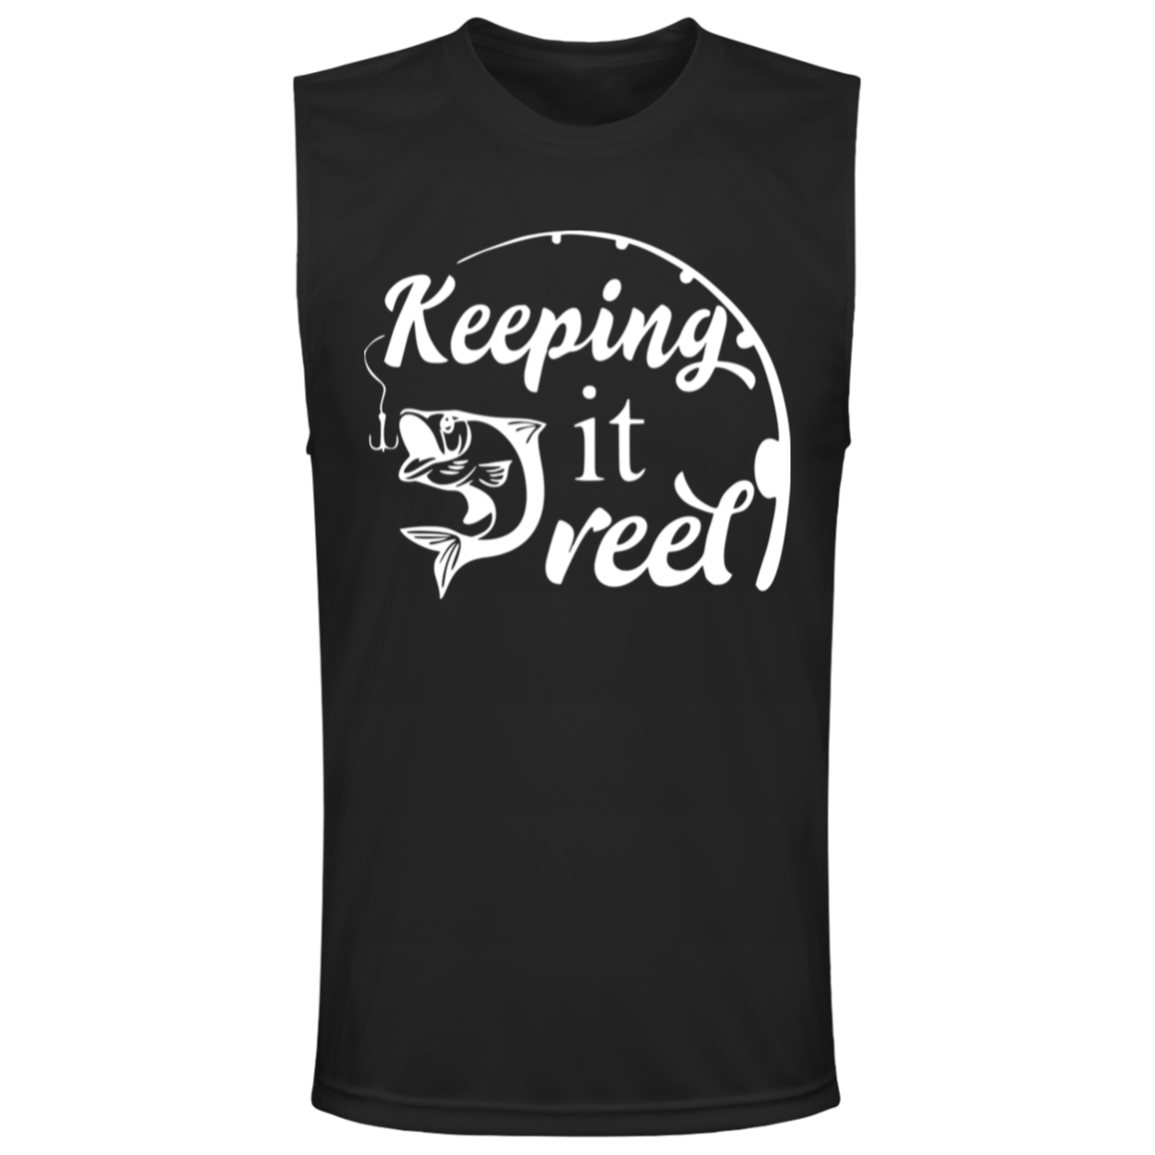 ***2 SIDED***  HRCL FL - Keeping it Reel - - 2 Sided - UV 40+ Protection TT11M Team 365 Mens Zone Muscle Tee